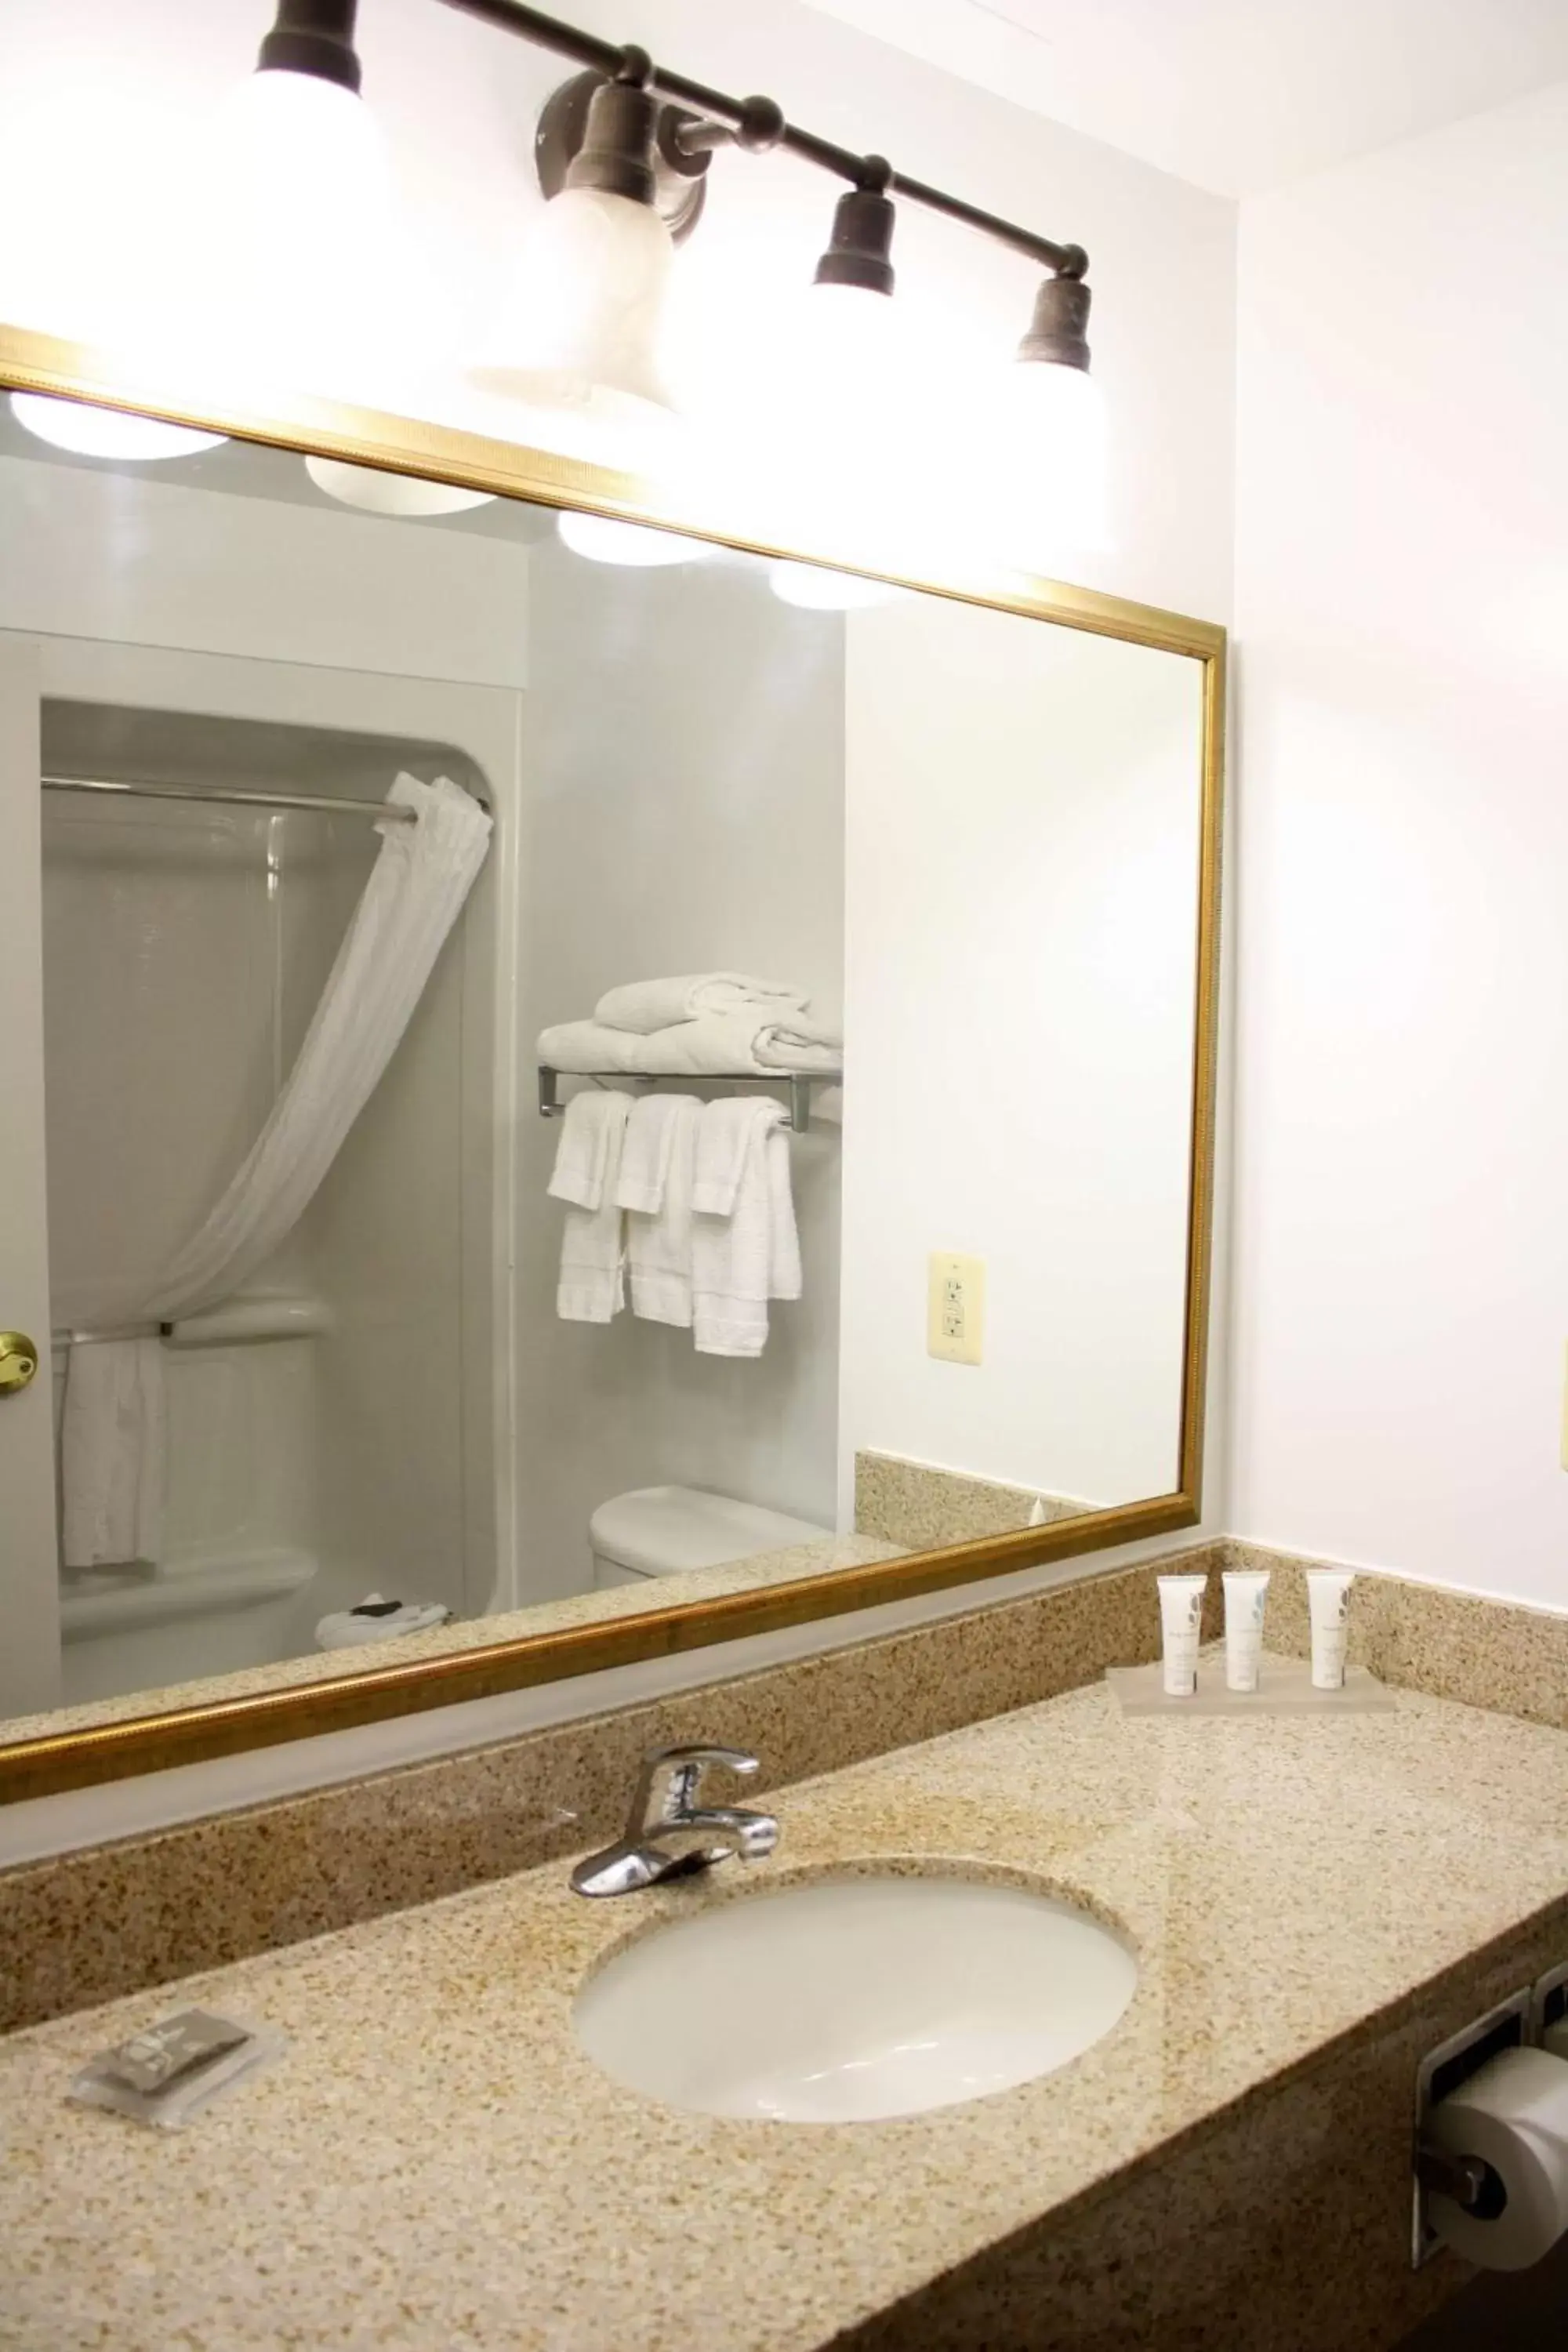 Bathroom in Country Inn & Suites by Radisson, BWI Airport (Baltimore), MD